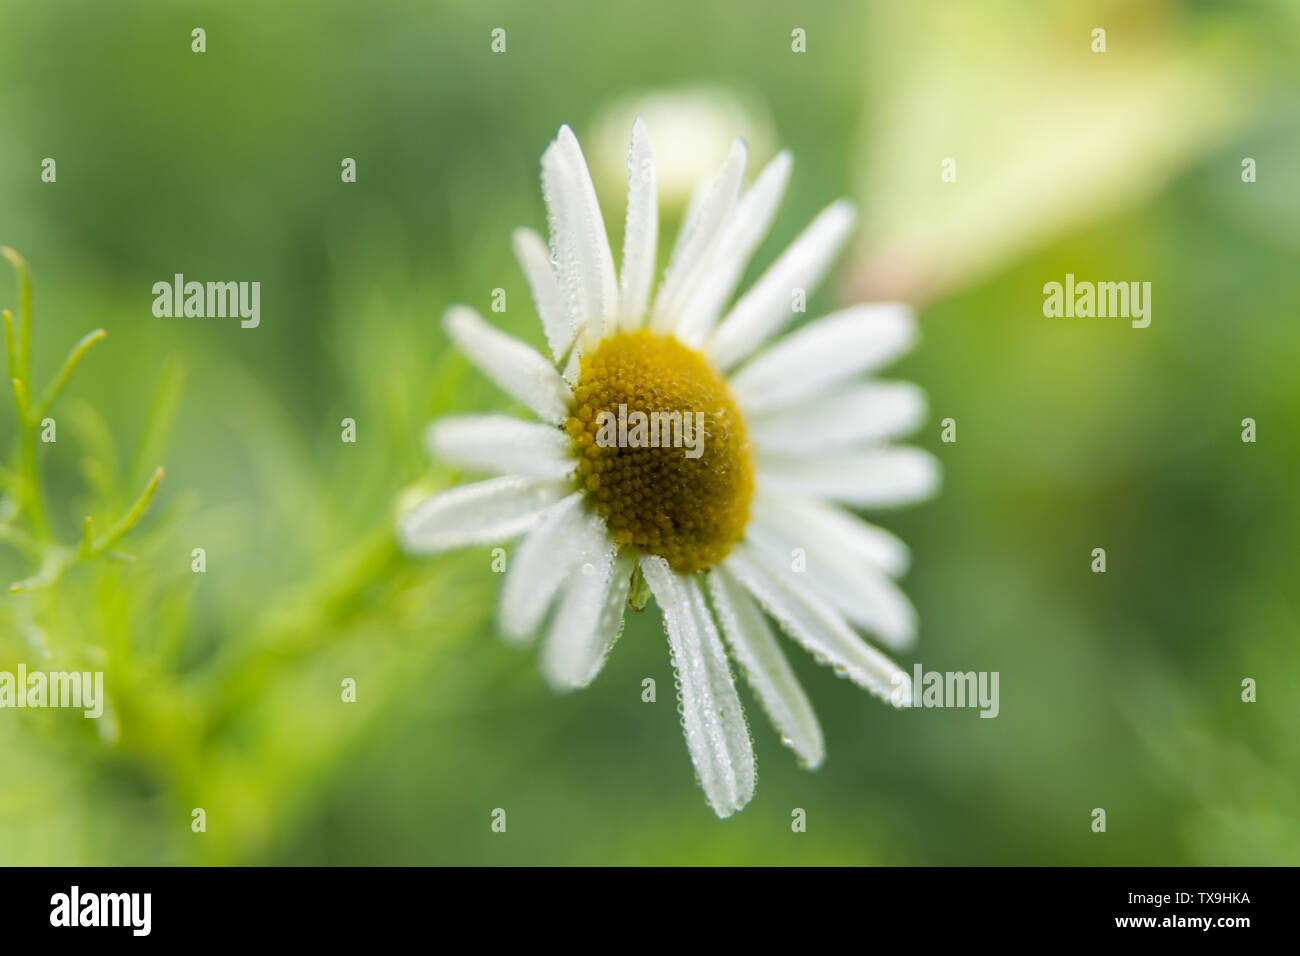 A close up of a single daisy flower on a green background Stock Photo